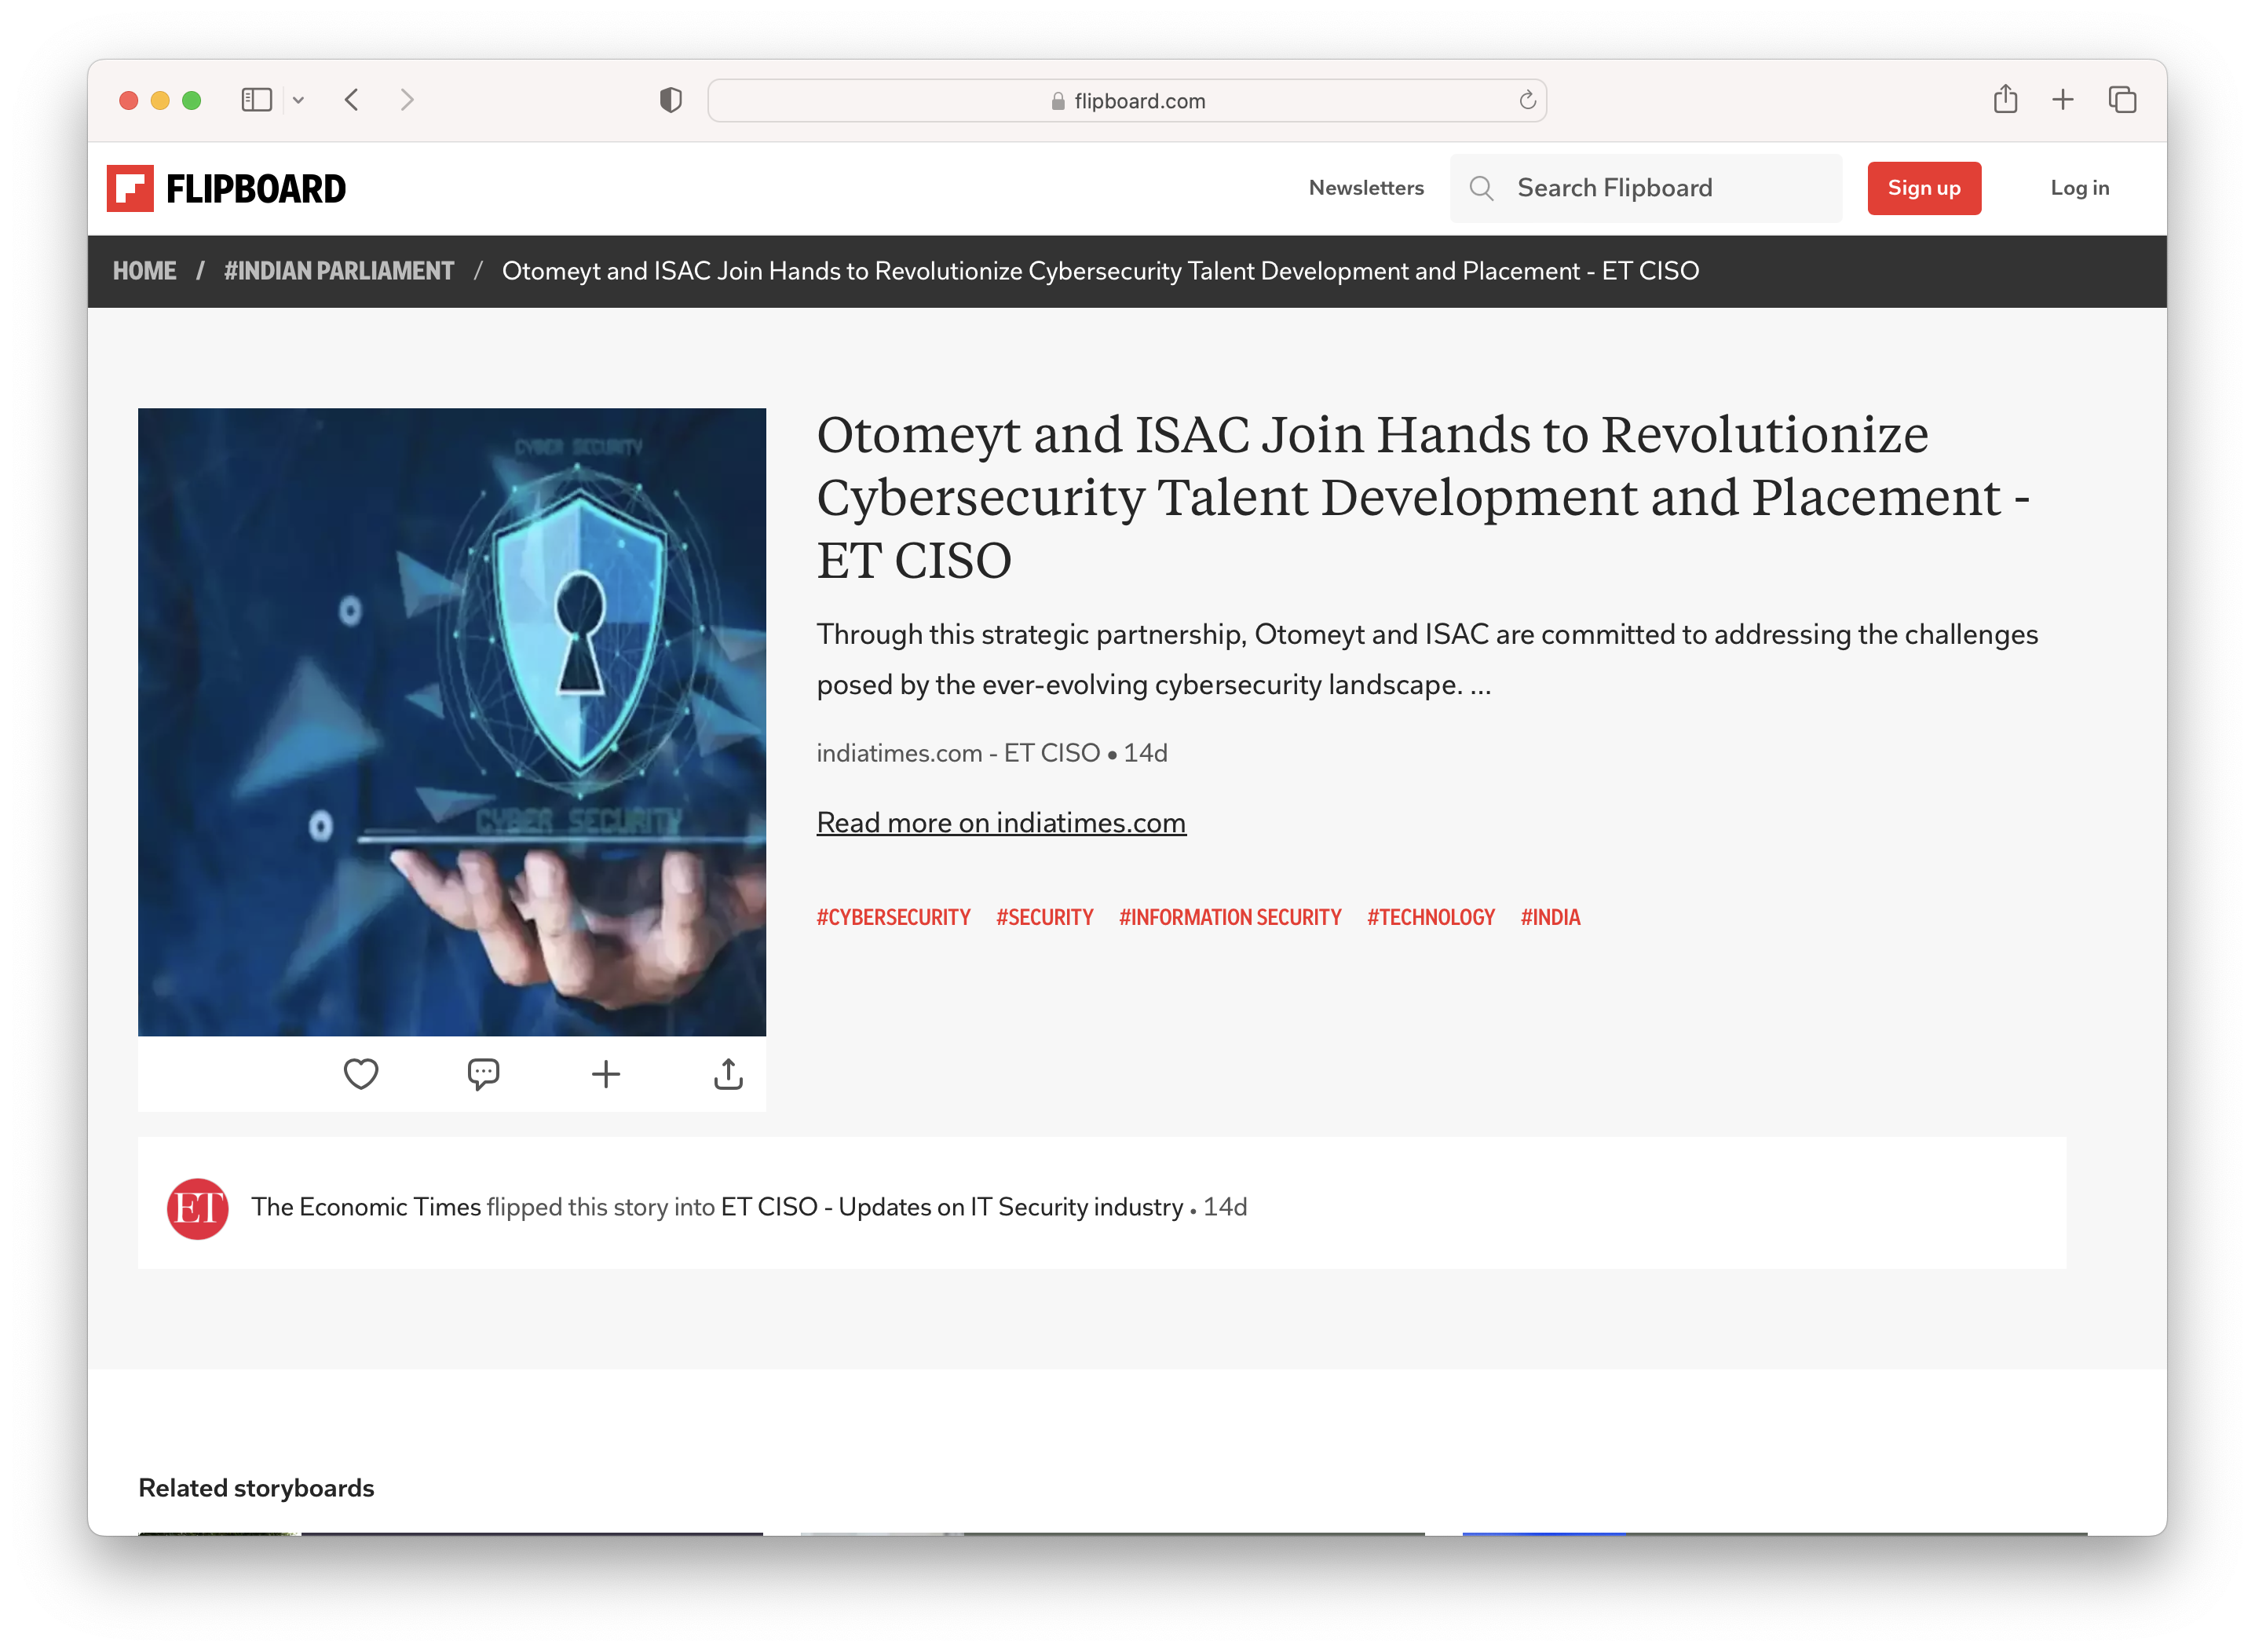 Otomeyt and ISAC Join Hands to Revolutionize Cybersecurity Talent Development and Placement